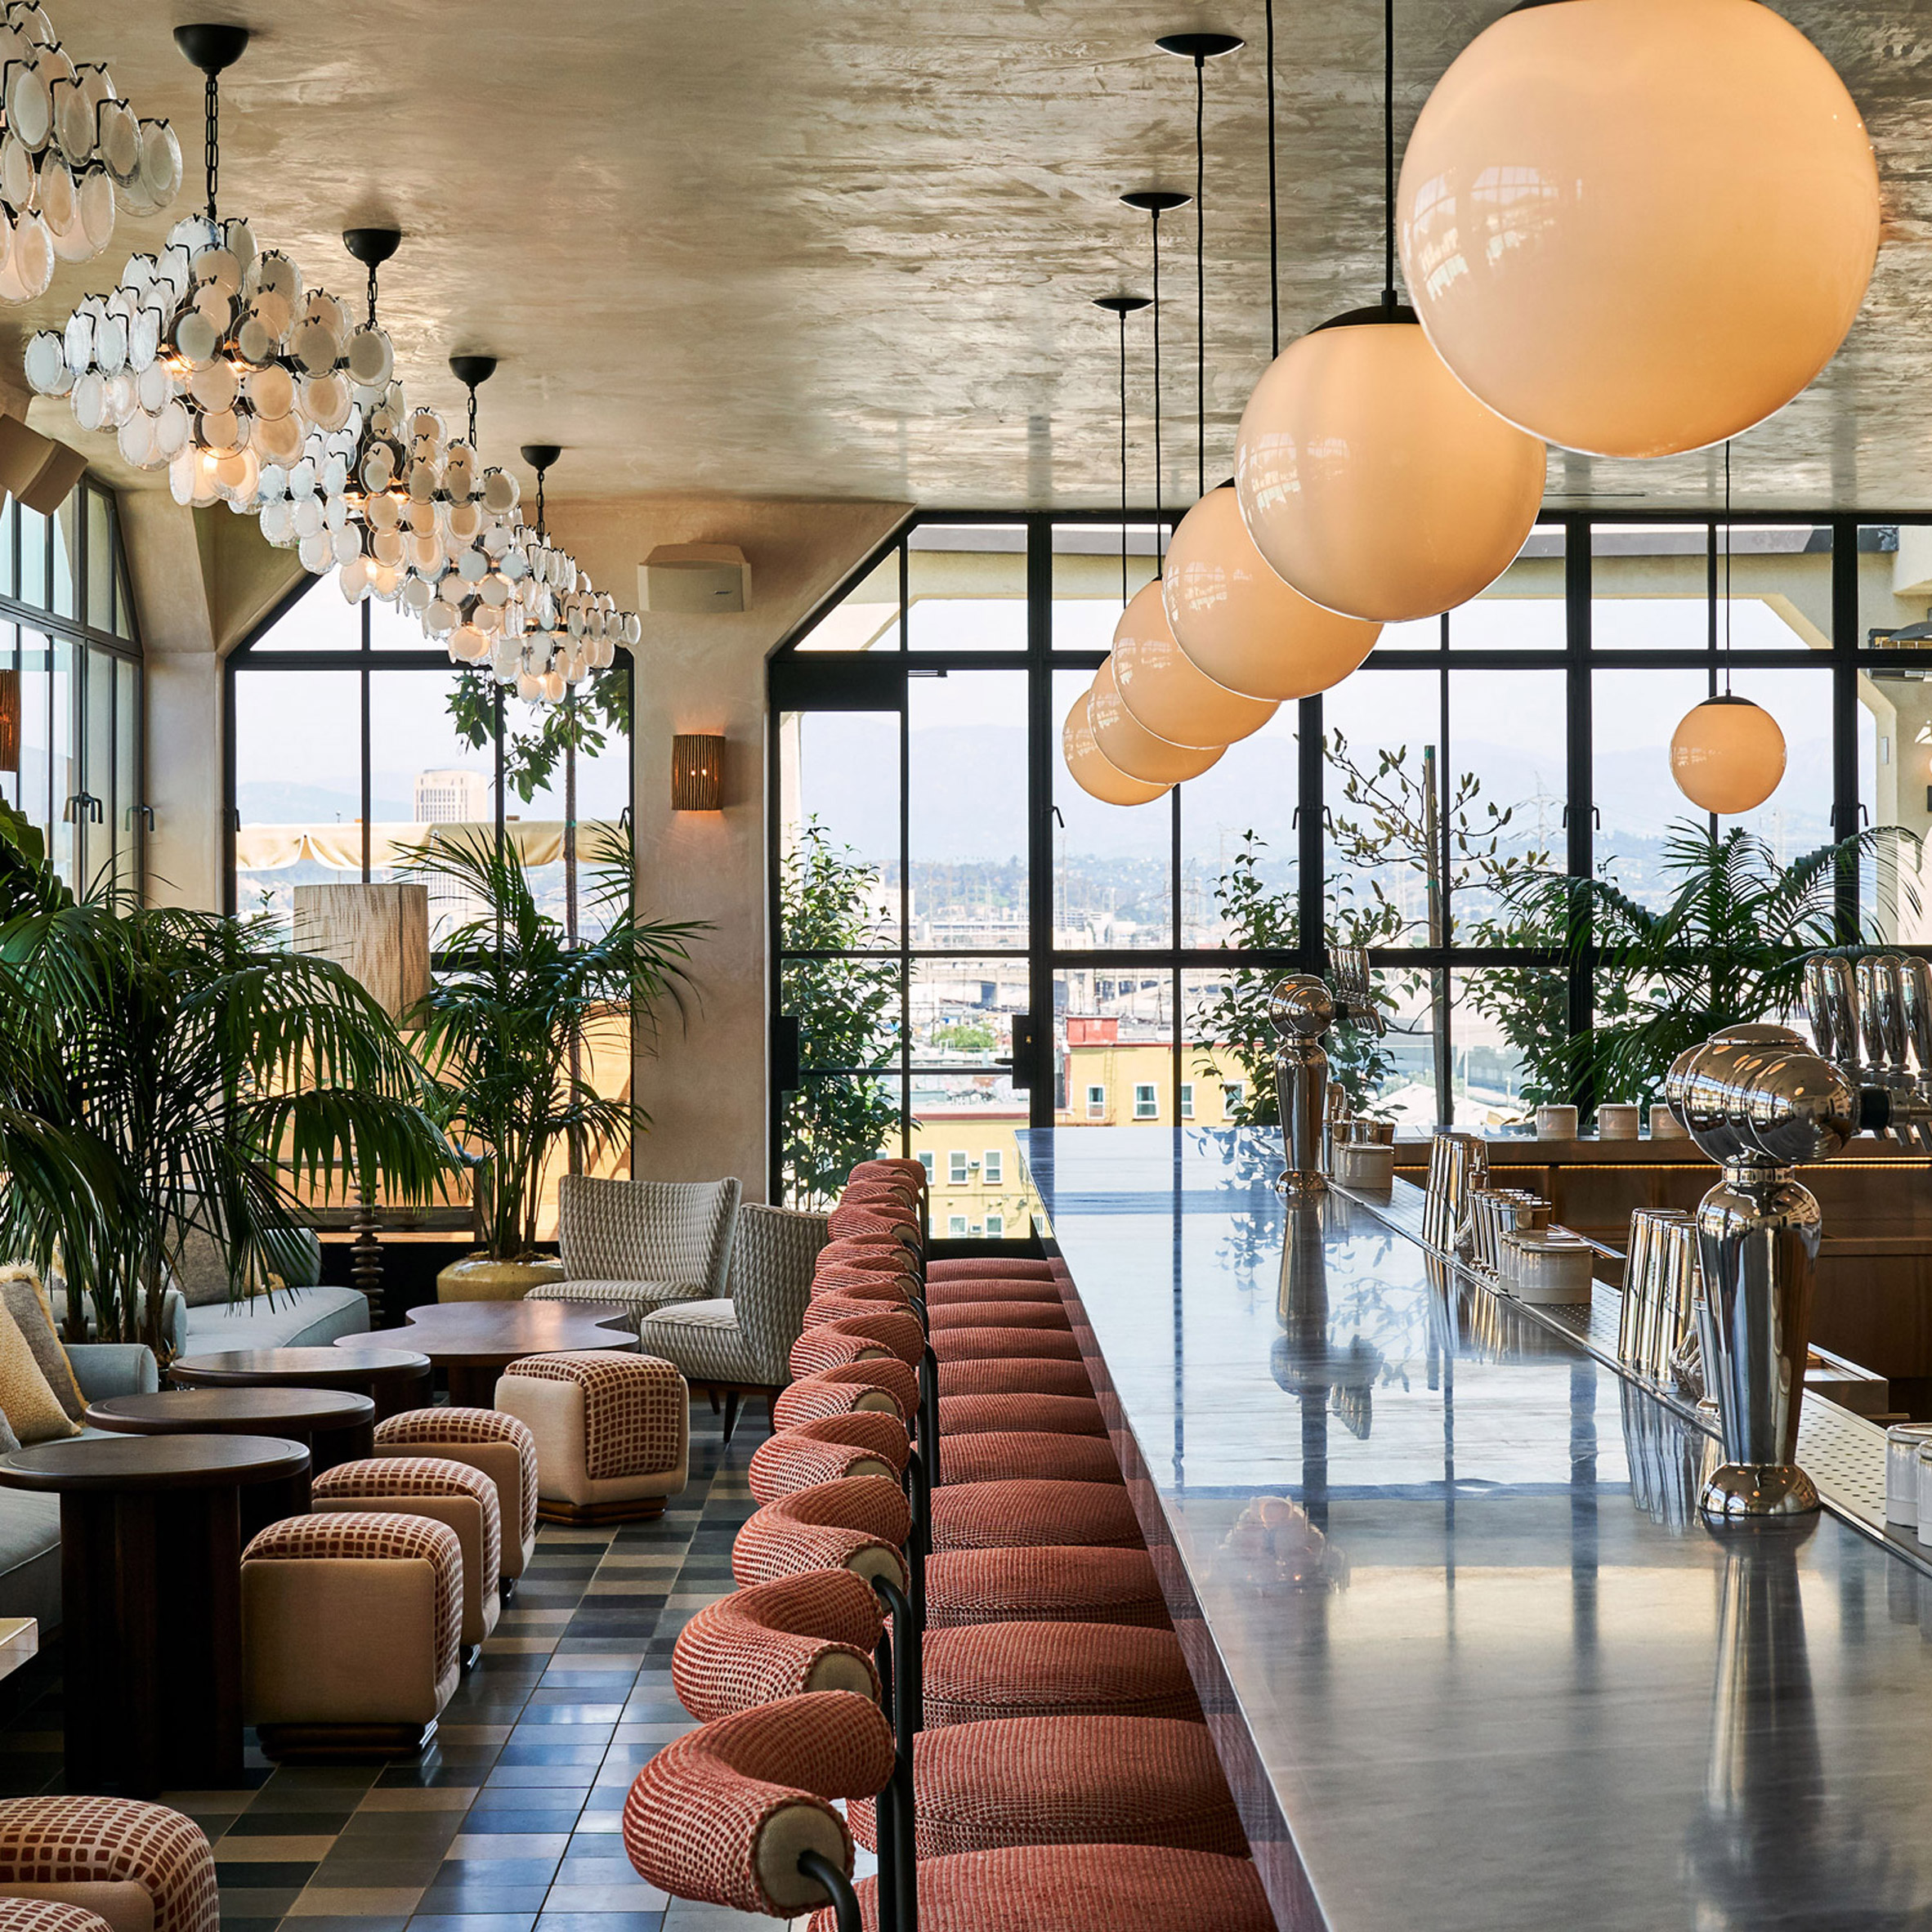 Top jobs in New York: Mid-level interior designer at Soho House in New York, USA